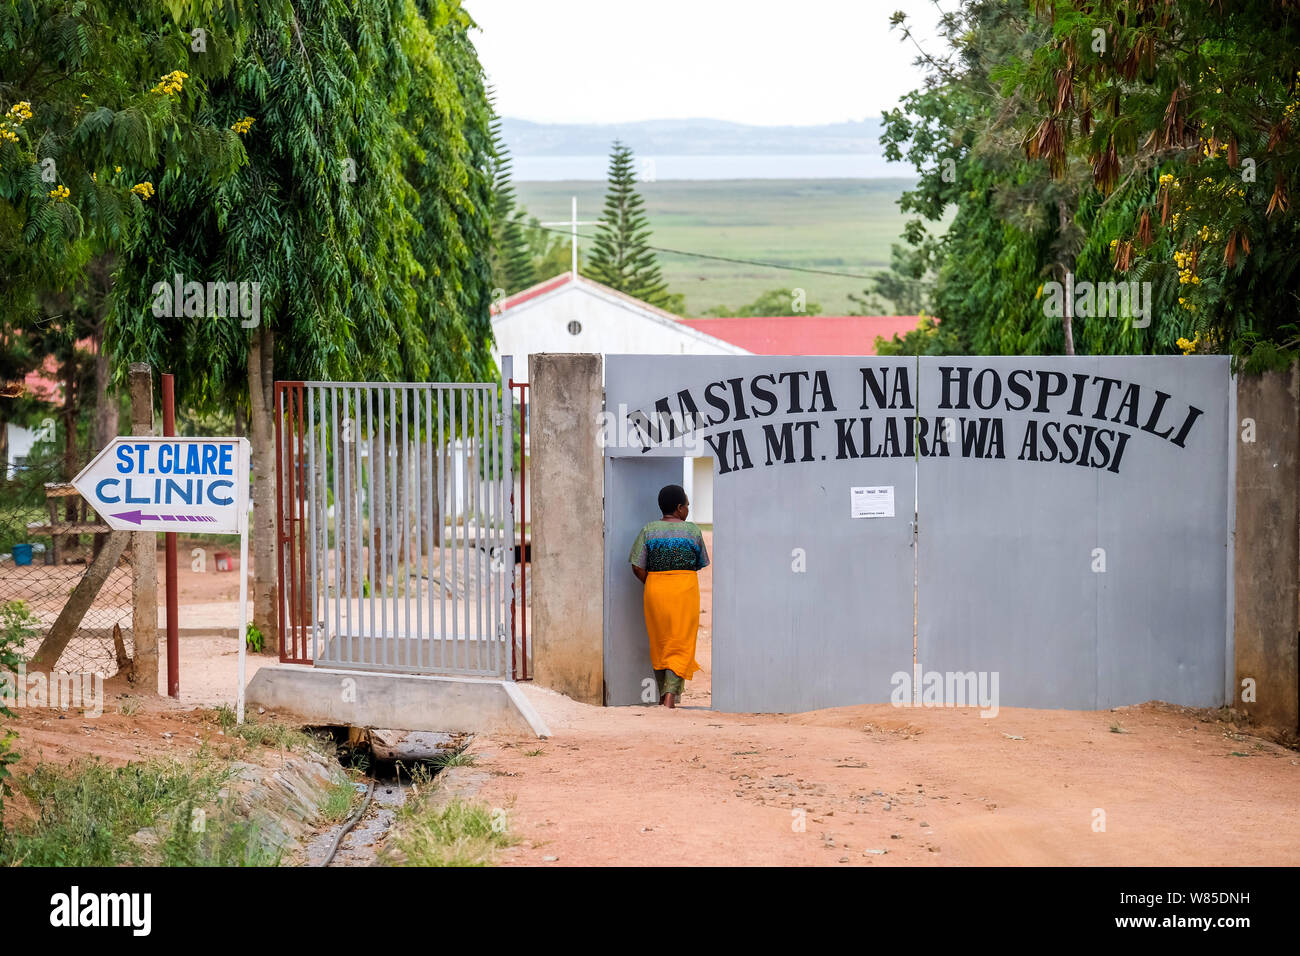 Sign points to the catholic St. Clare Clinic of the German missionary doctor Thomas Brei, in Mwanza, Tanzania, Africa Stock Photo